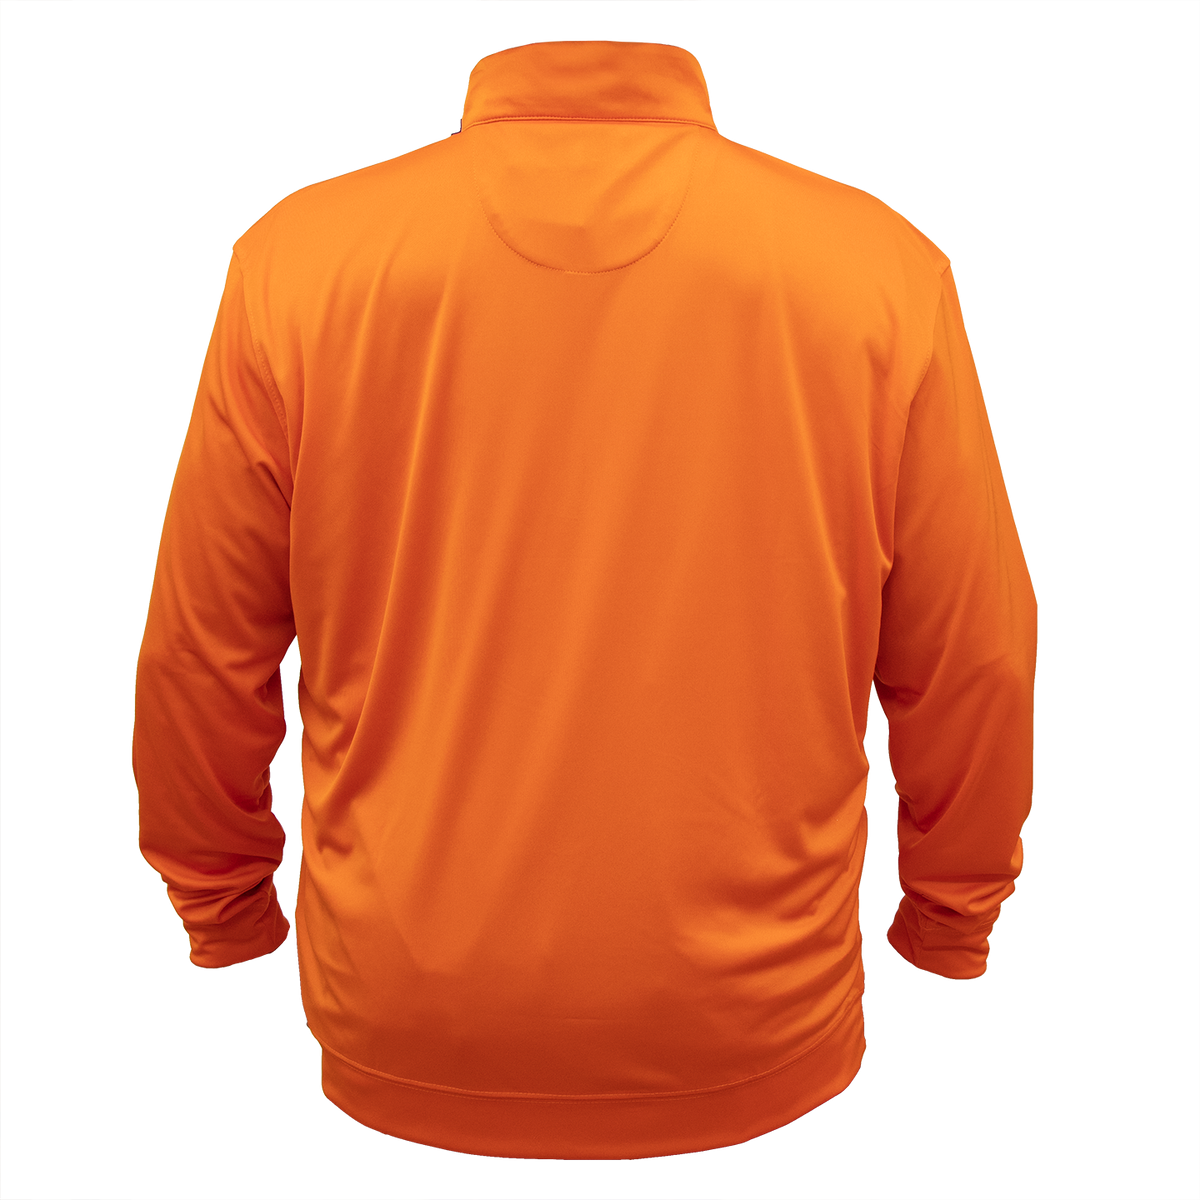 Orange 1/4 Zip Pull Over with White Clemson Tiger Paw